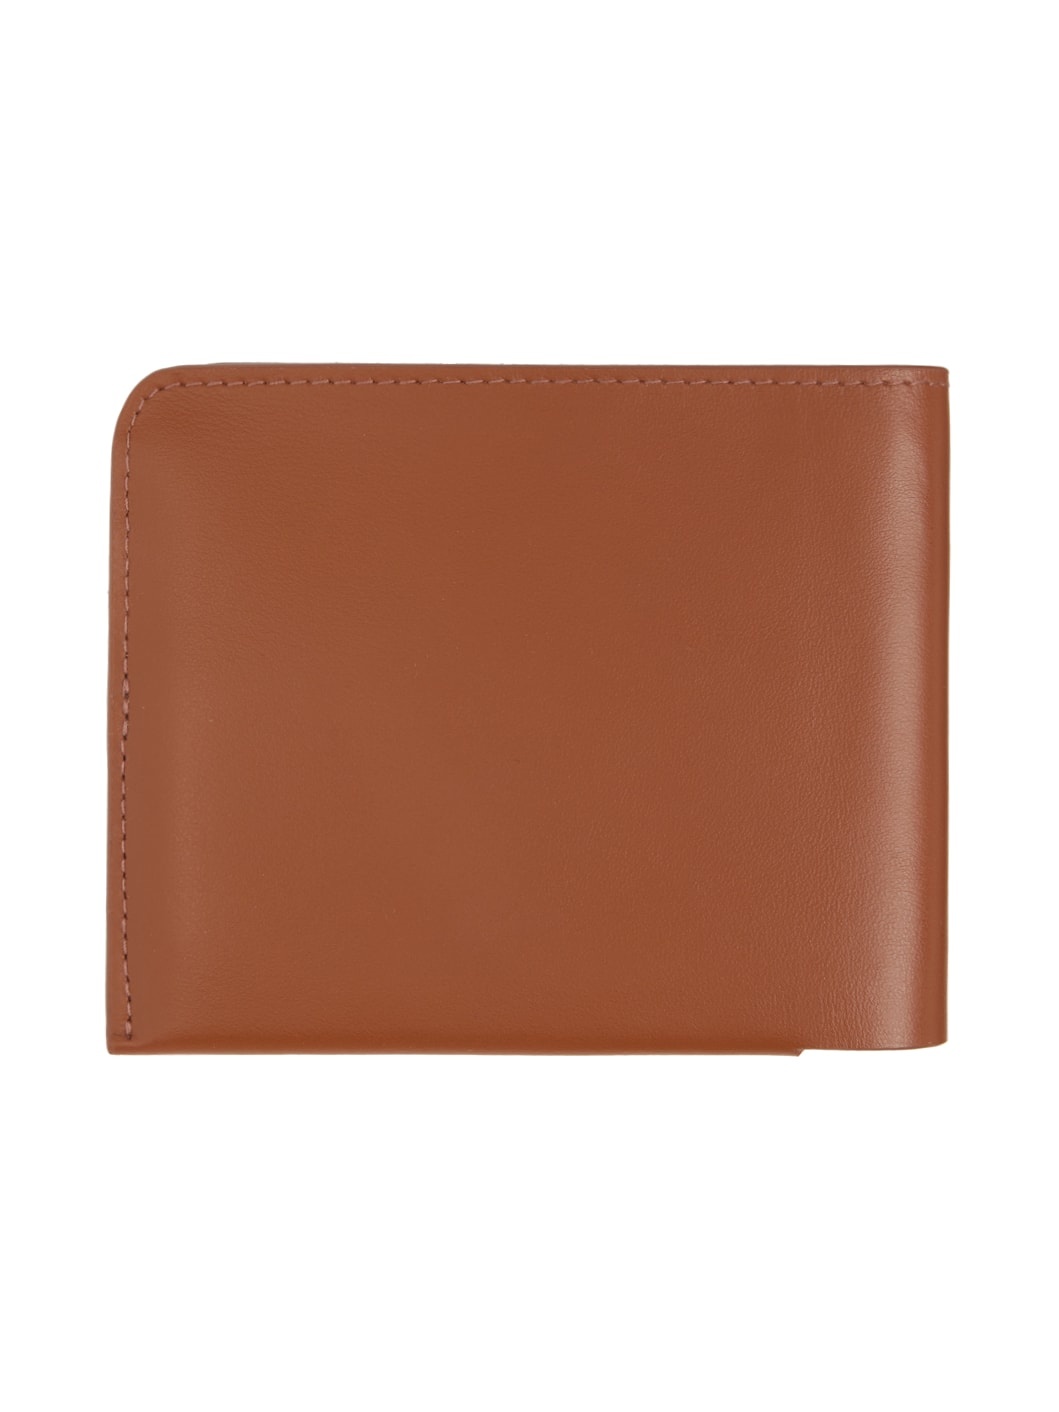 Tan Leather Wallet - 2